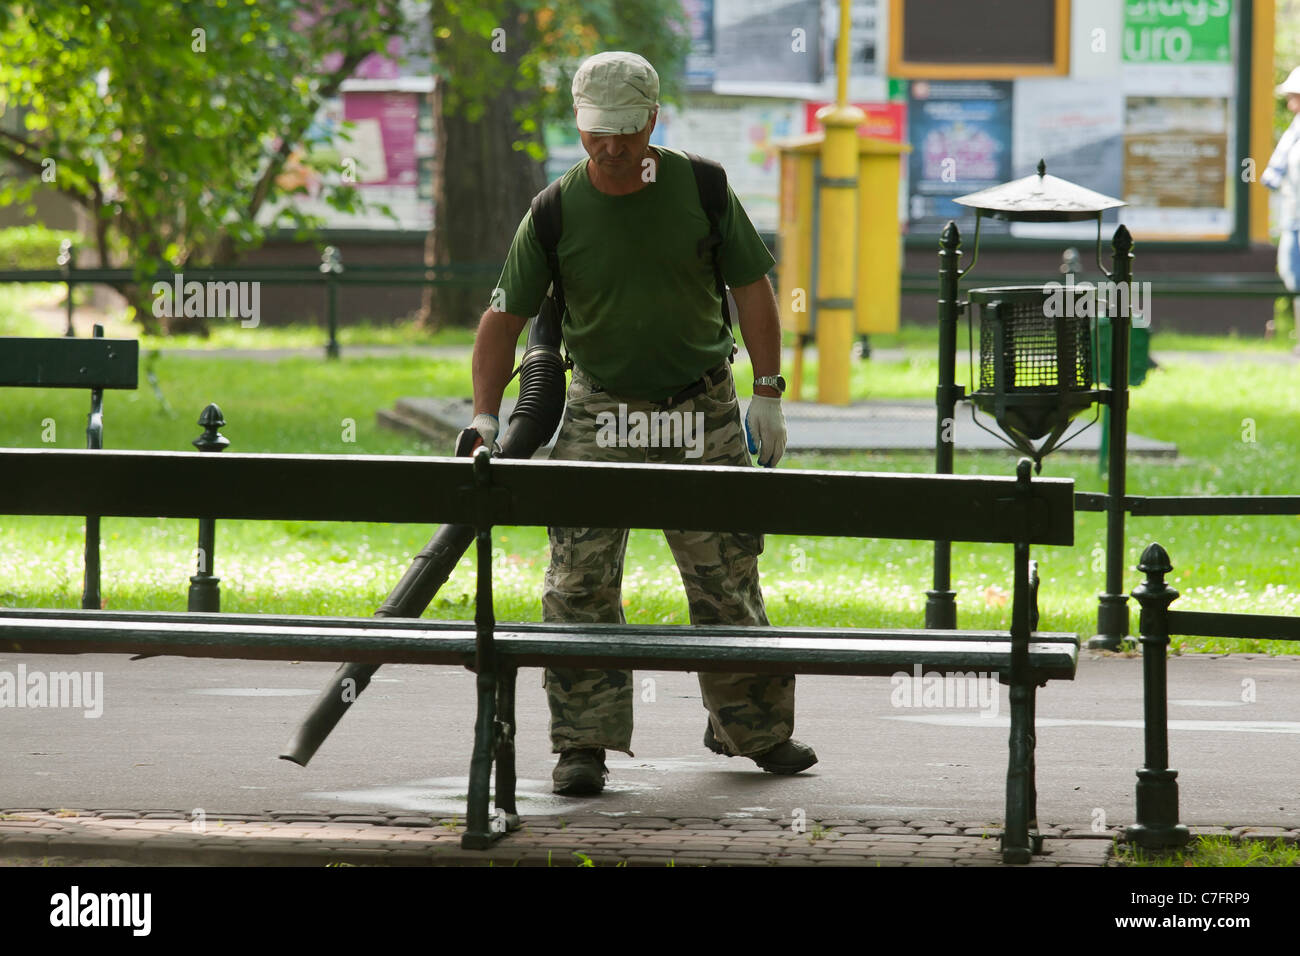 Maintenance worker cleaning a park alley using a blower. Krakow, Poland. Stock Photo